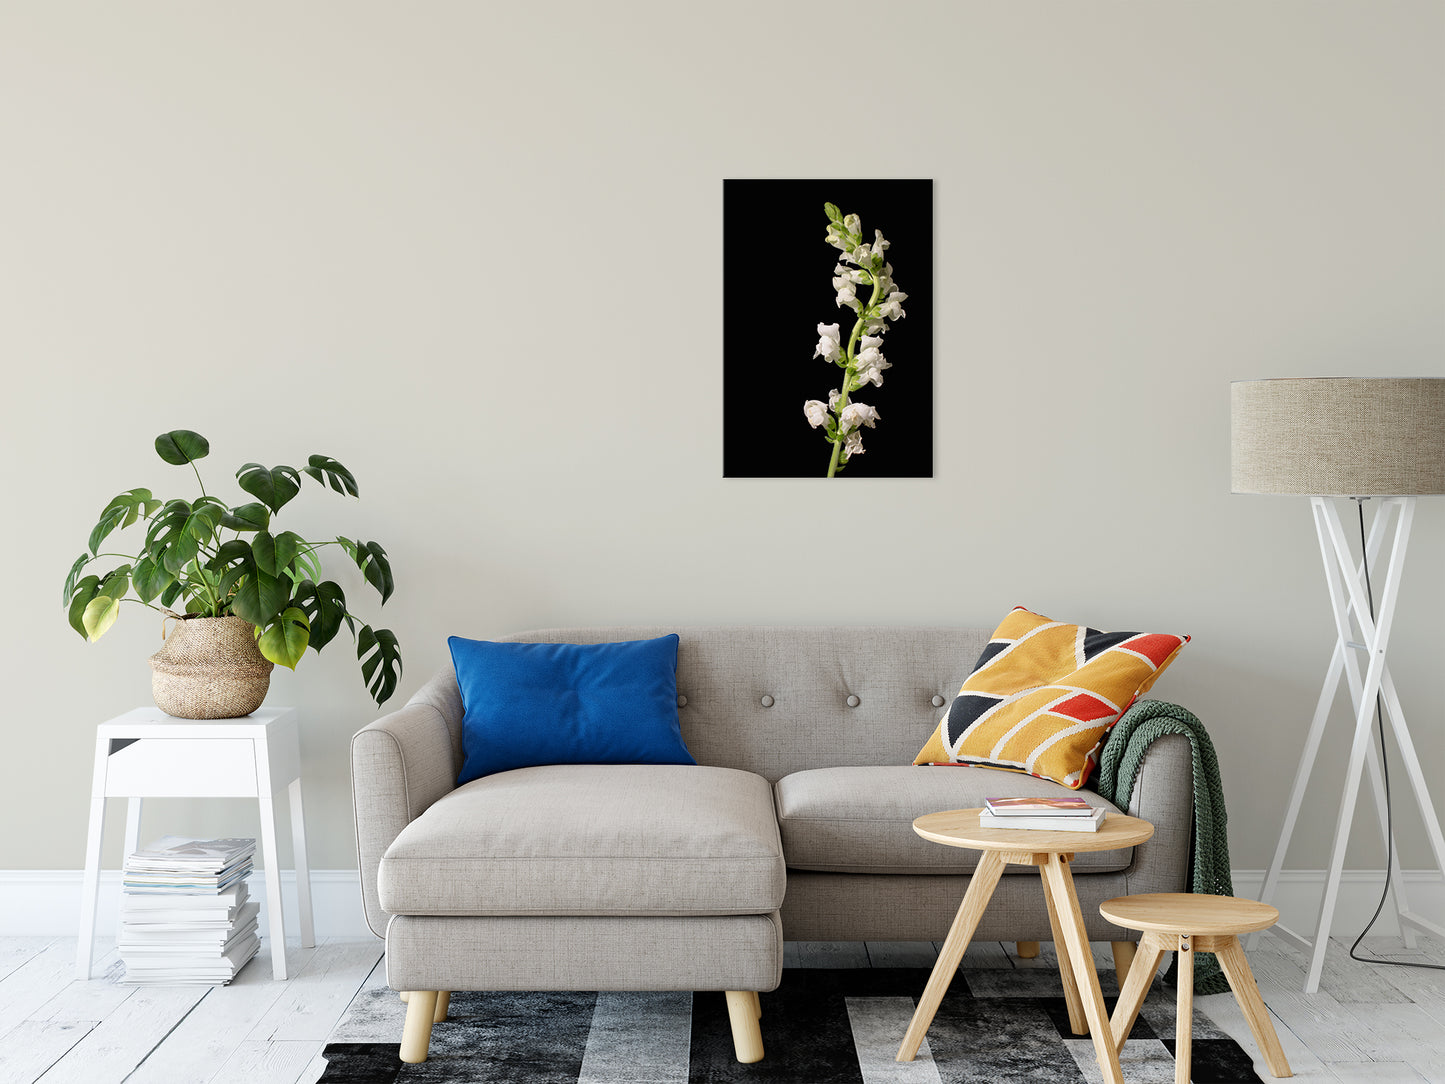 White Snapdragons Against Black Nature / Floral Photo Fine Art Canvas Wall Art Prints 20" x 30" - PIPAFINEART